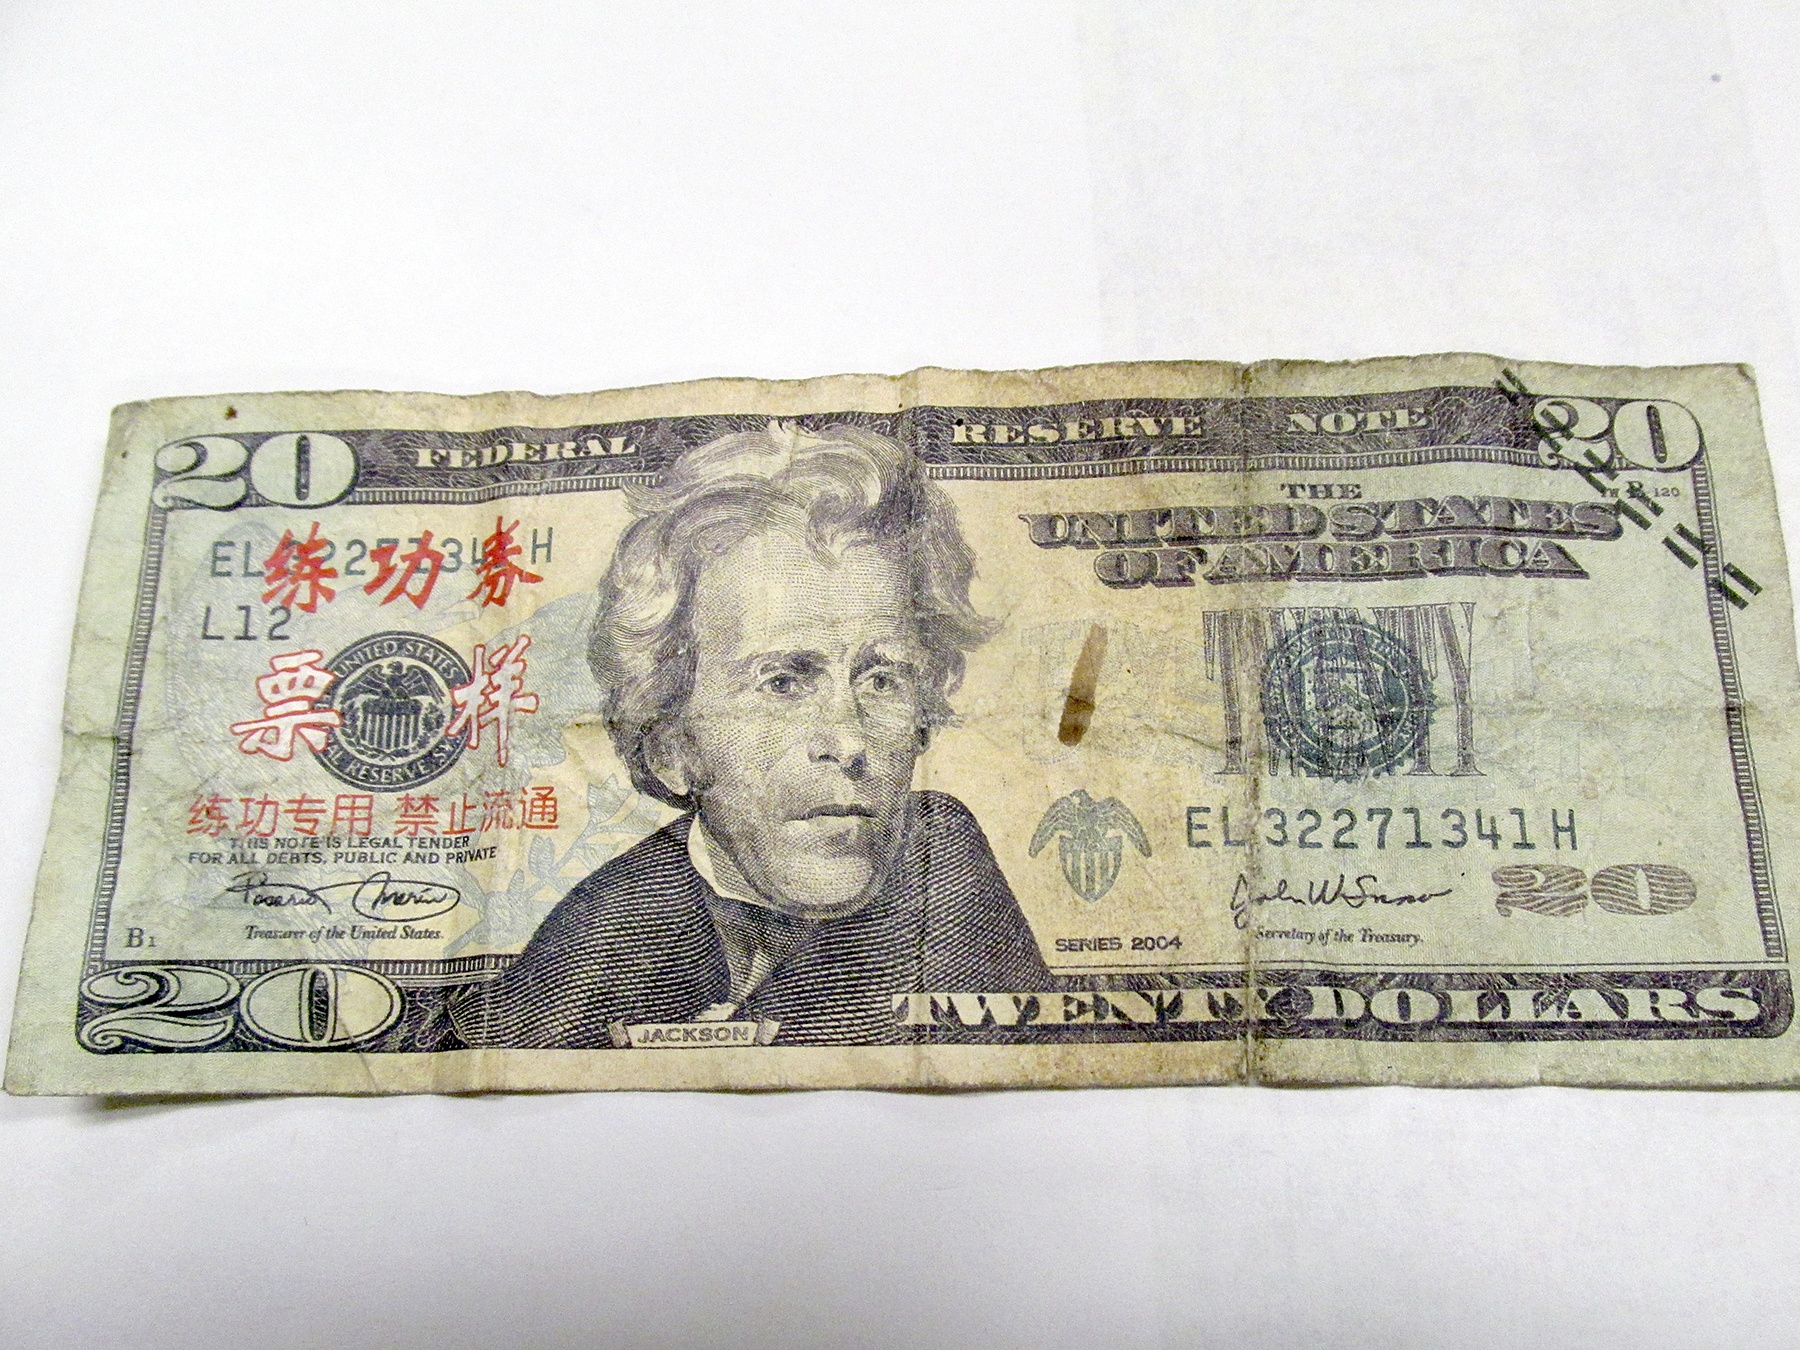 Fake or counterfeit currency that is being circulated in the area. (Deputy Don Kitchen)